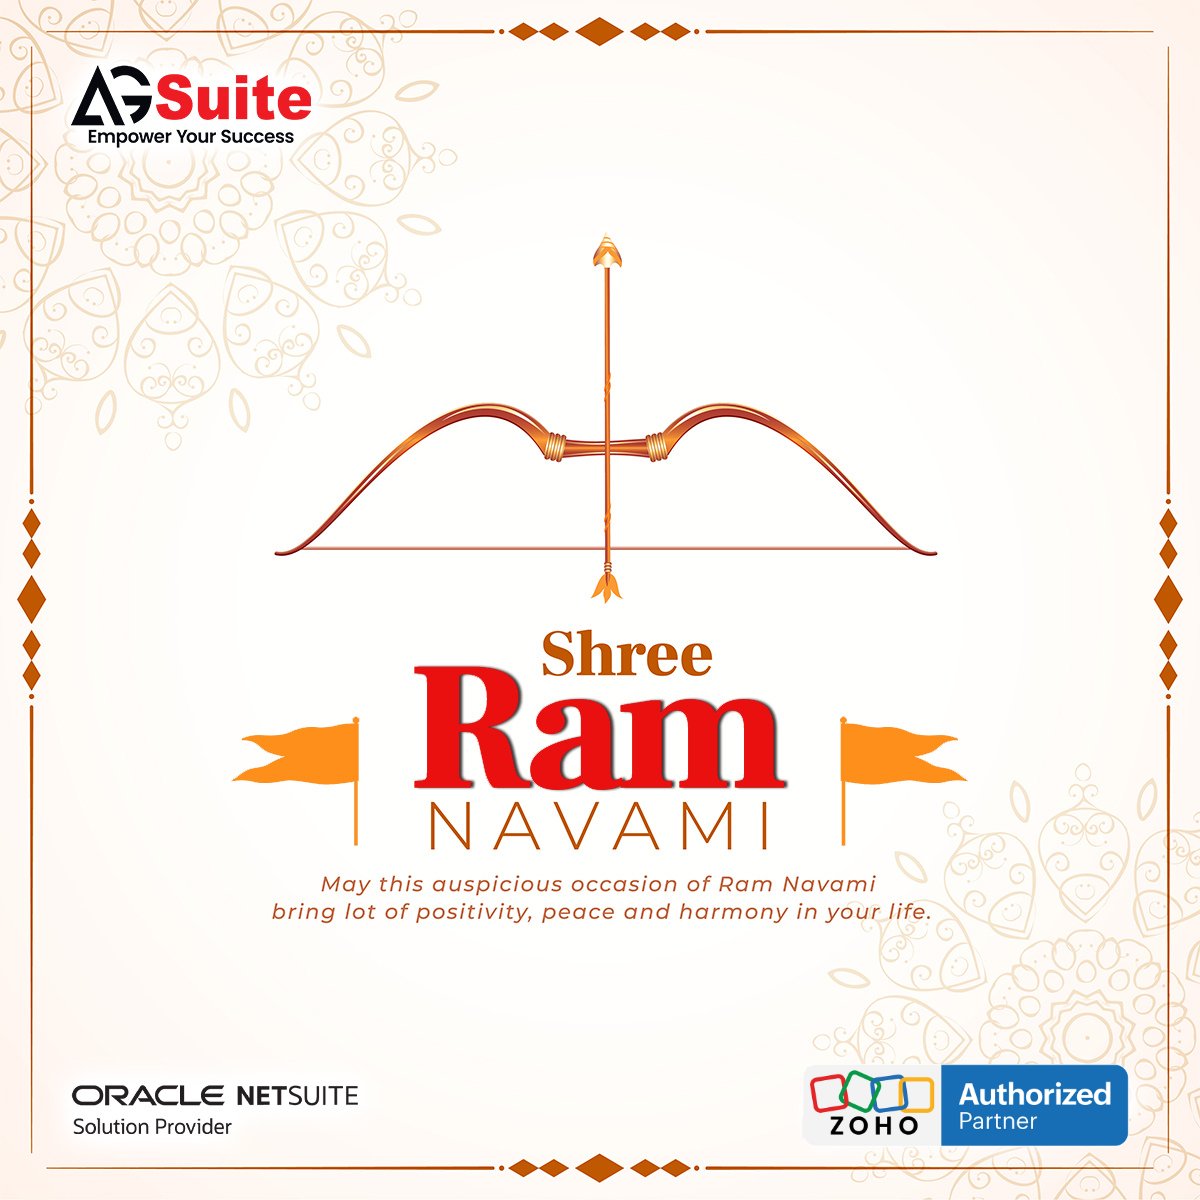 May the divine grace of Lord Rama be with you and your family on Ram Navami and always. Wishing you a blessed and joyous celebration!

#RamNavamicelebration #LordRama #Divineblessings #Spiritualobservance #Festivetraditions #JaiShriRam #AGSuite